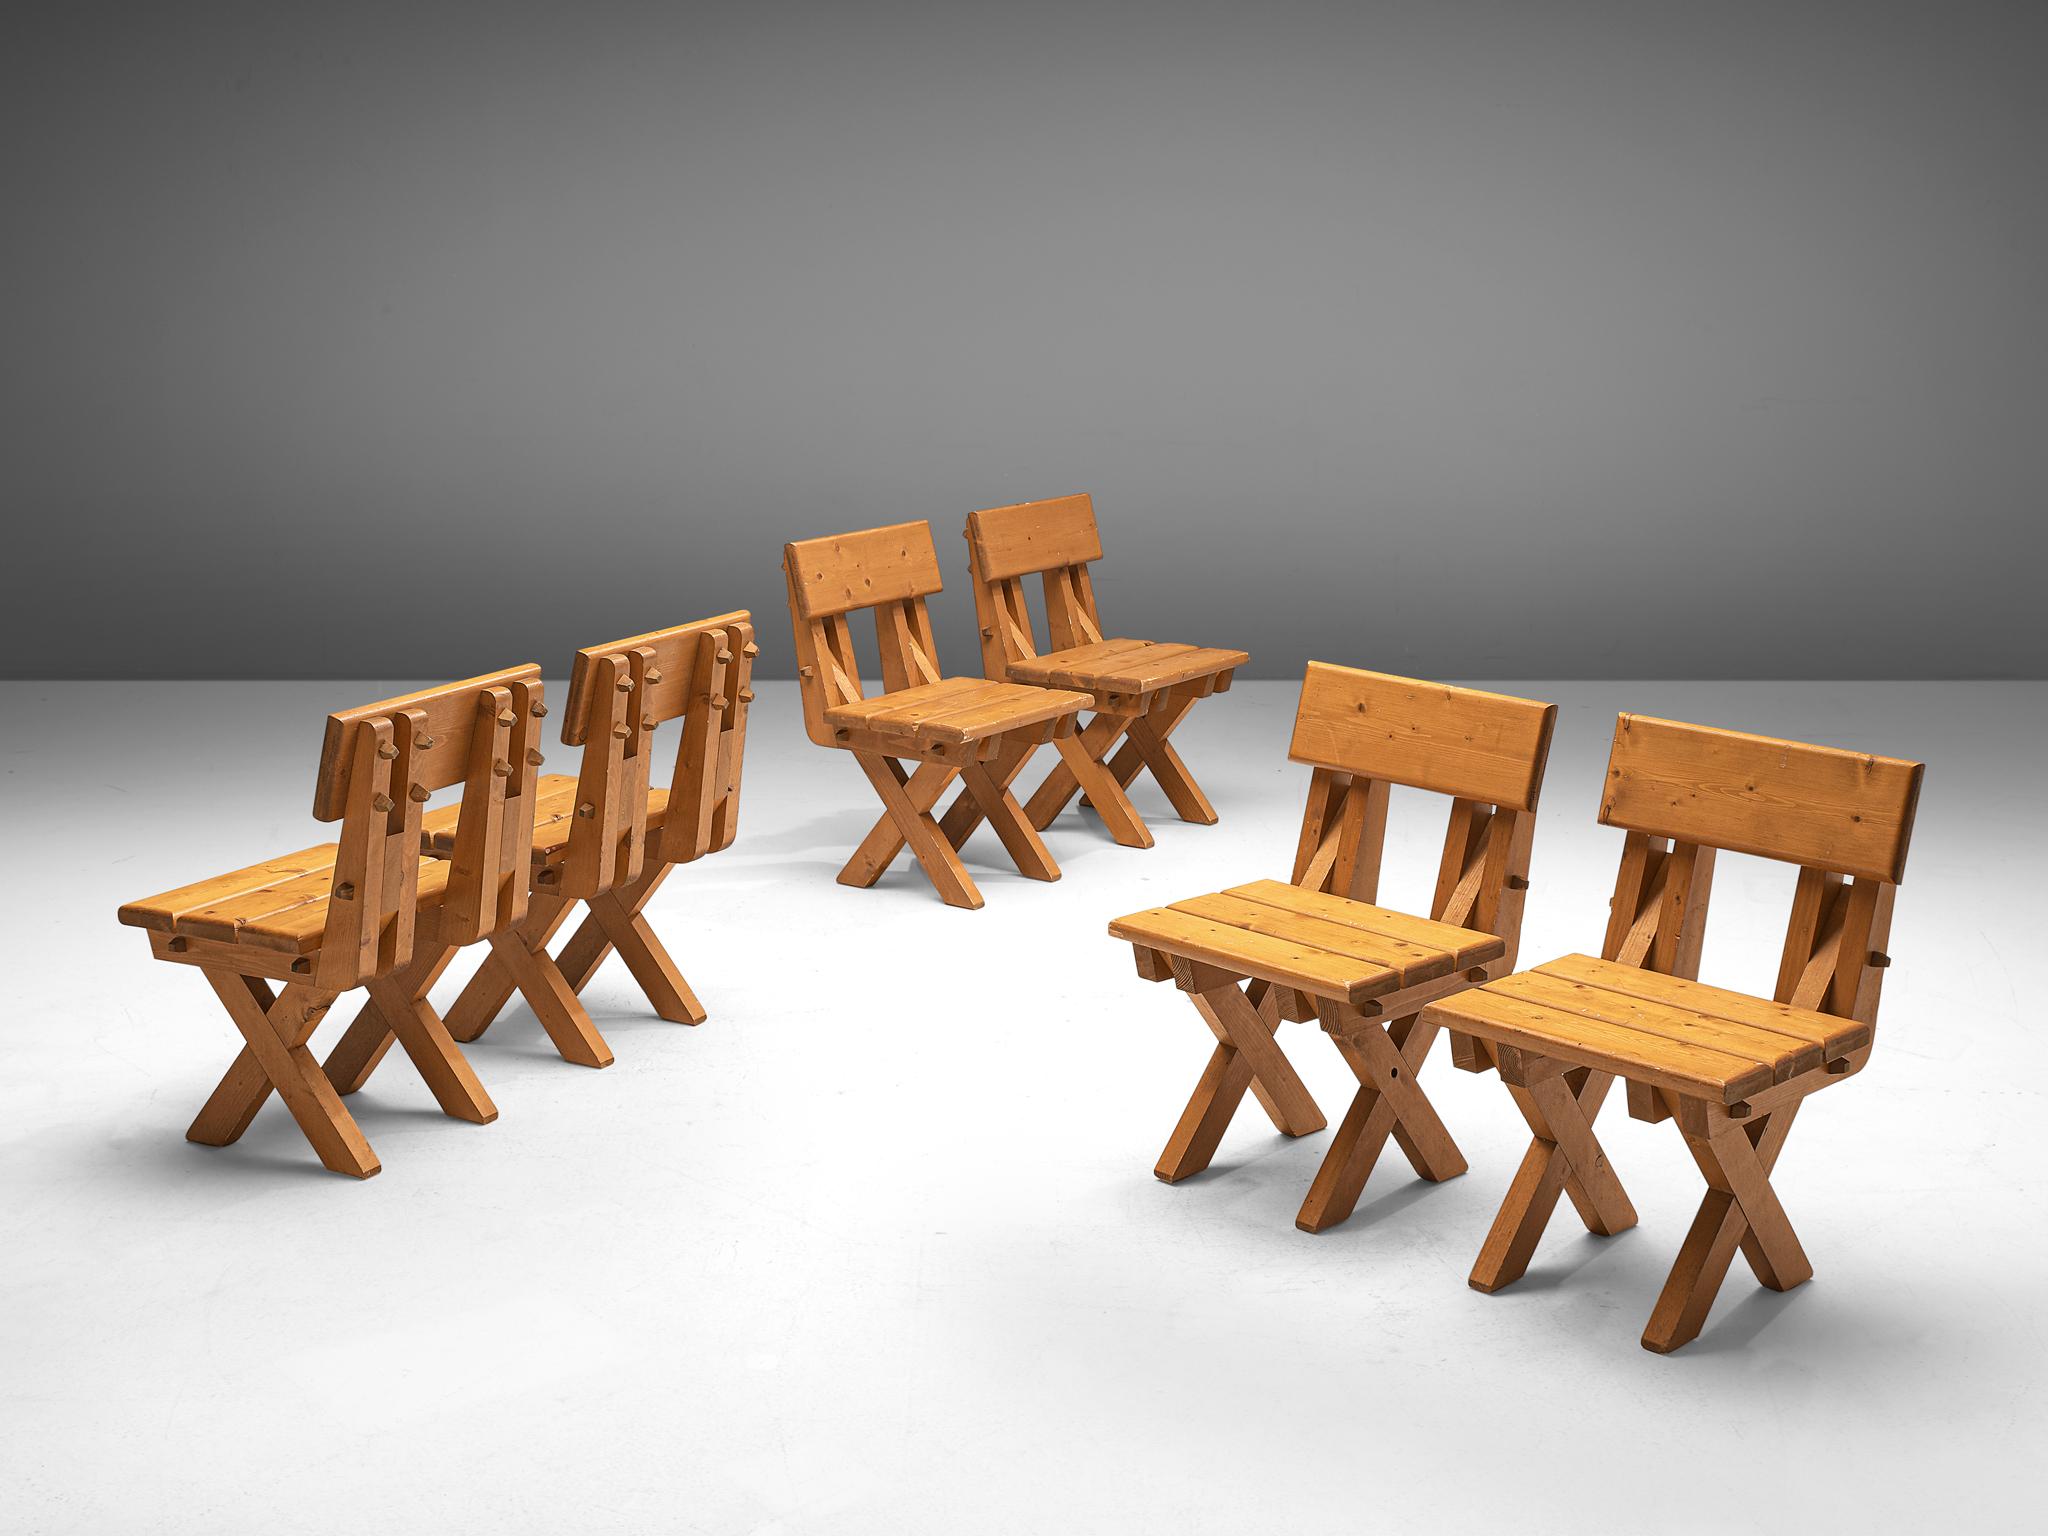 Set of six stools, pine, Spain, 1960s

Brutalist set of six chairs from Spain with a strict, sturdy design. The stools feature an architectural frame, build up in solely straight lines. The chairs are completely executed in thick slats of pine